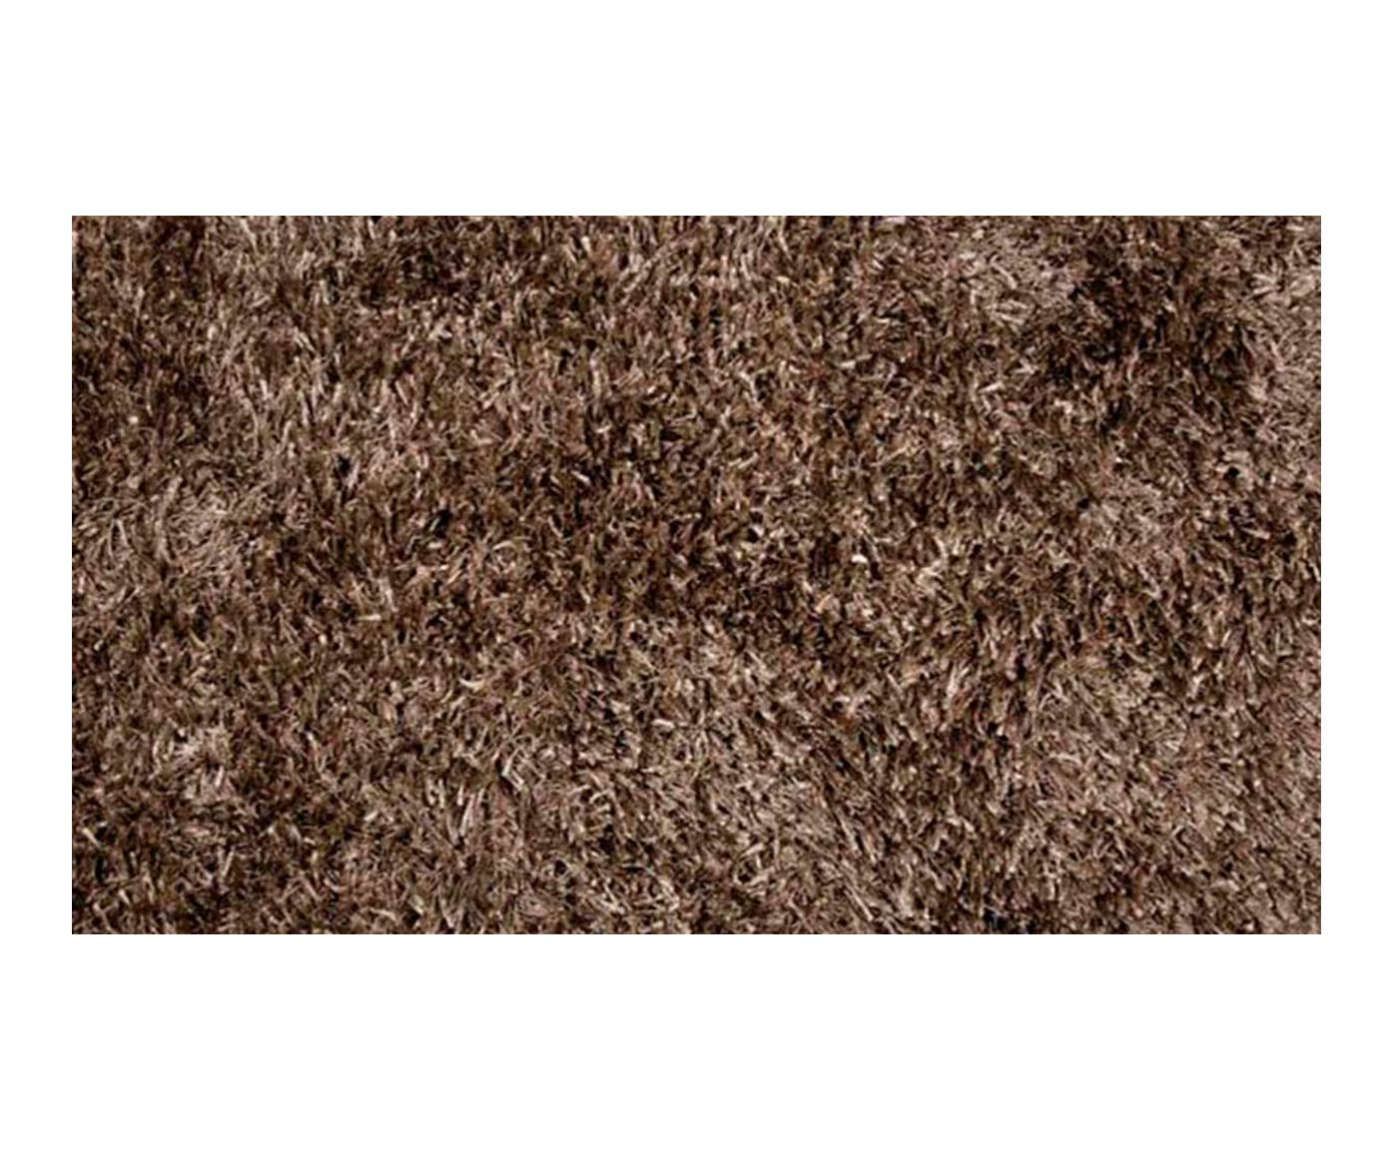 Tapete king especial shaggy ground - 200 x 300 cm | Westwing.com.br